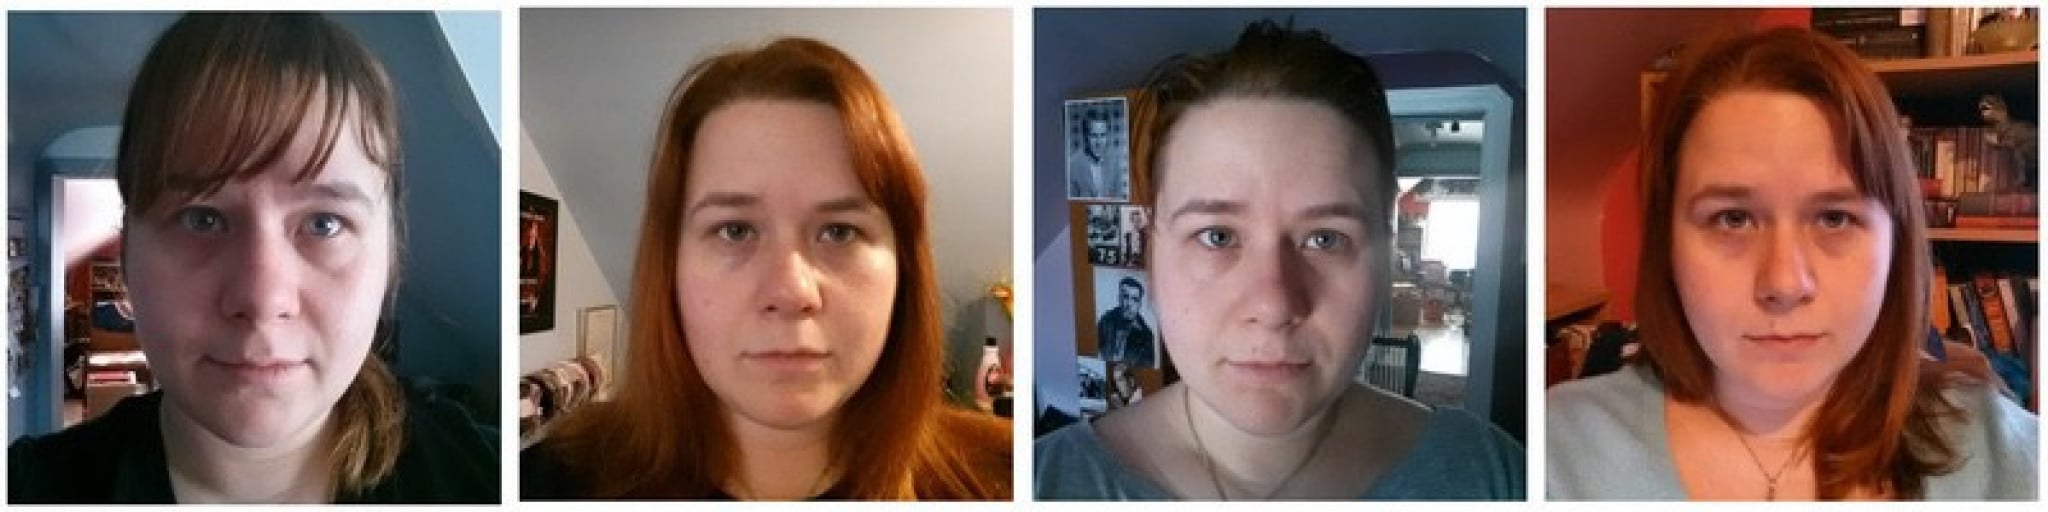 Tracking a Weight Loss Journey on Reddit: a User's Month 1 Progress